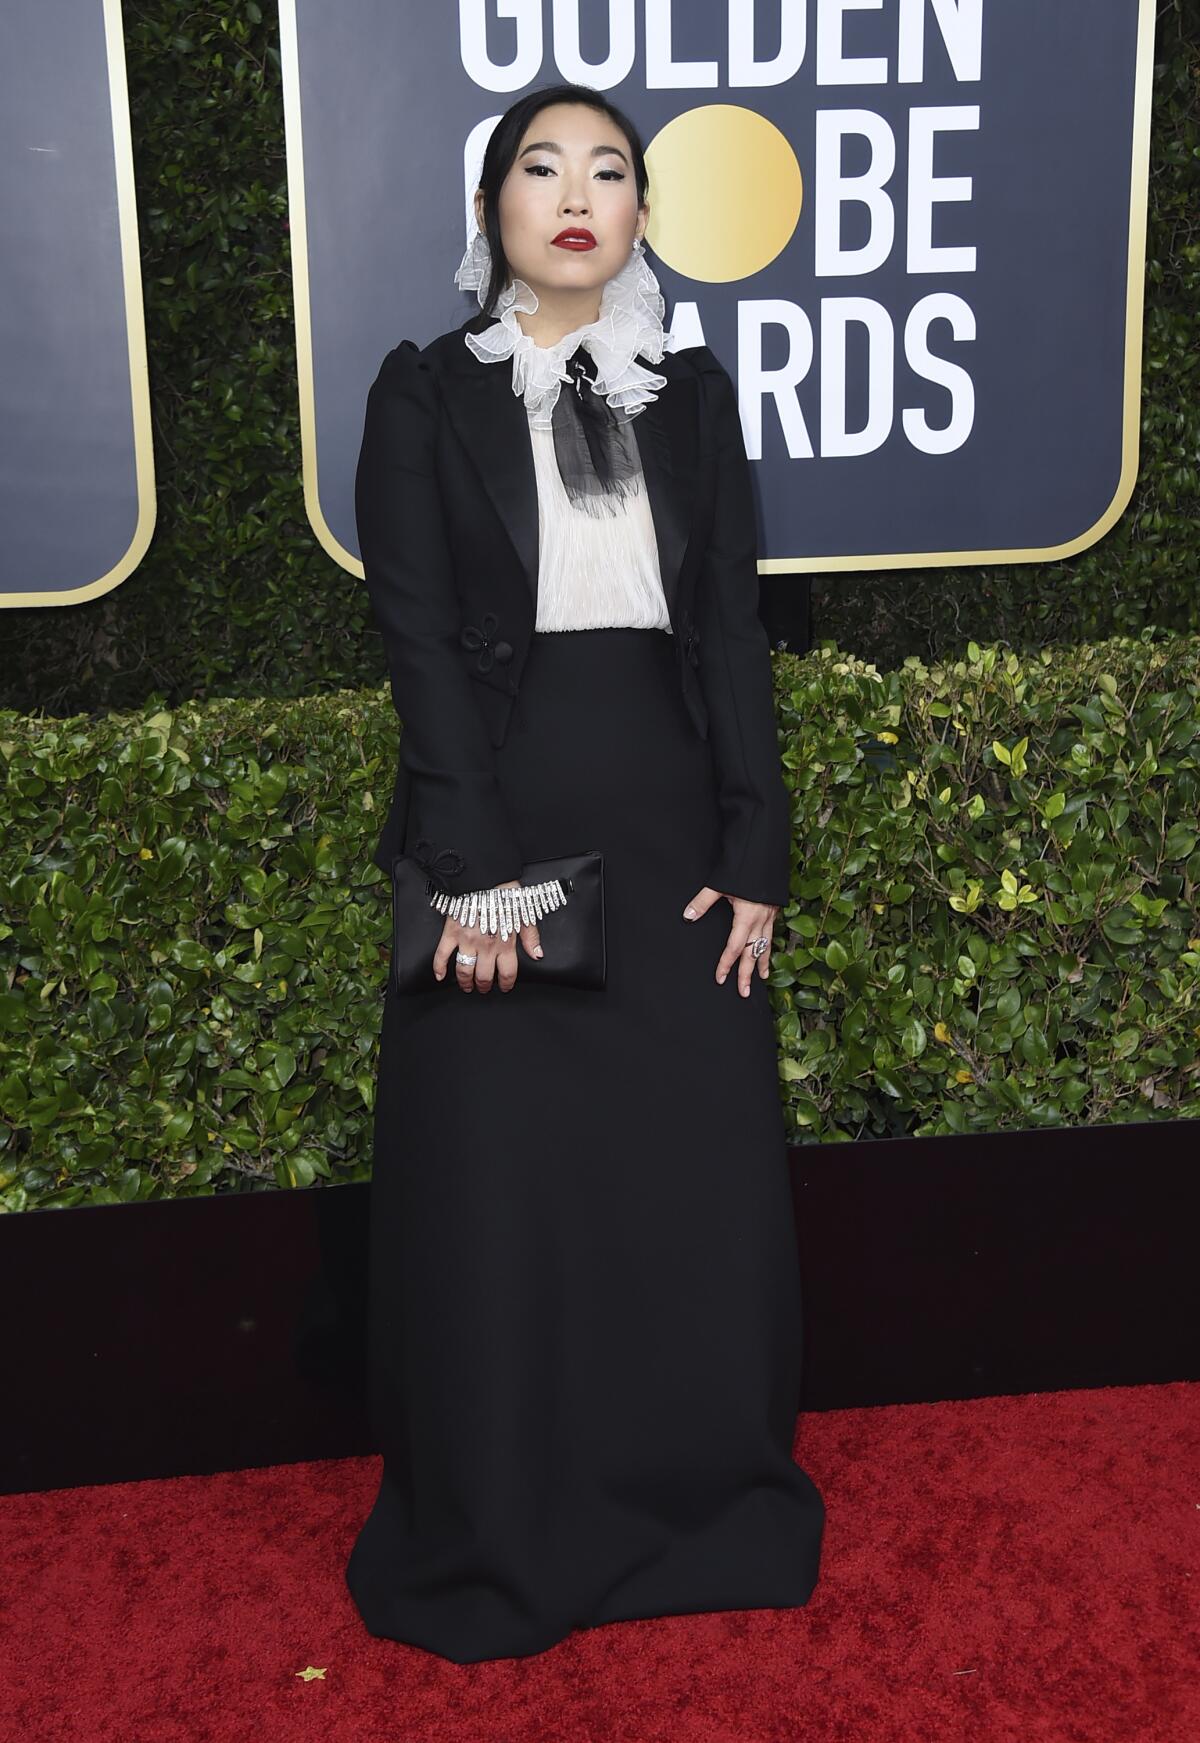 On the fence: Awkwafina in a black and white tuxedo-style look with a ruffled collar by Dior Haute Couture. 